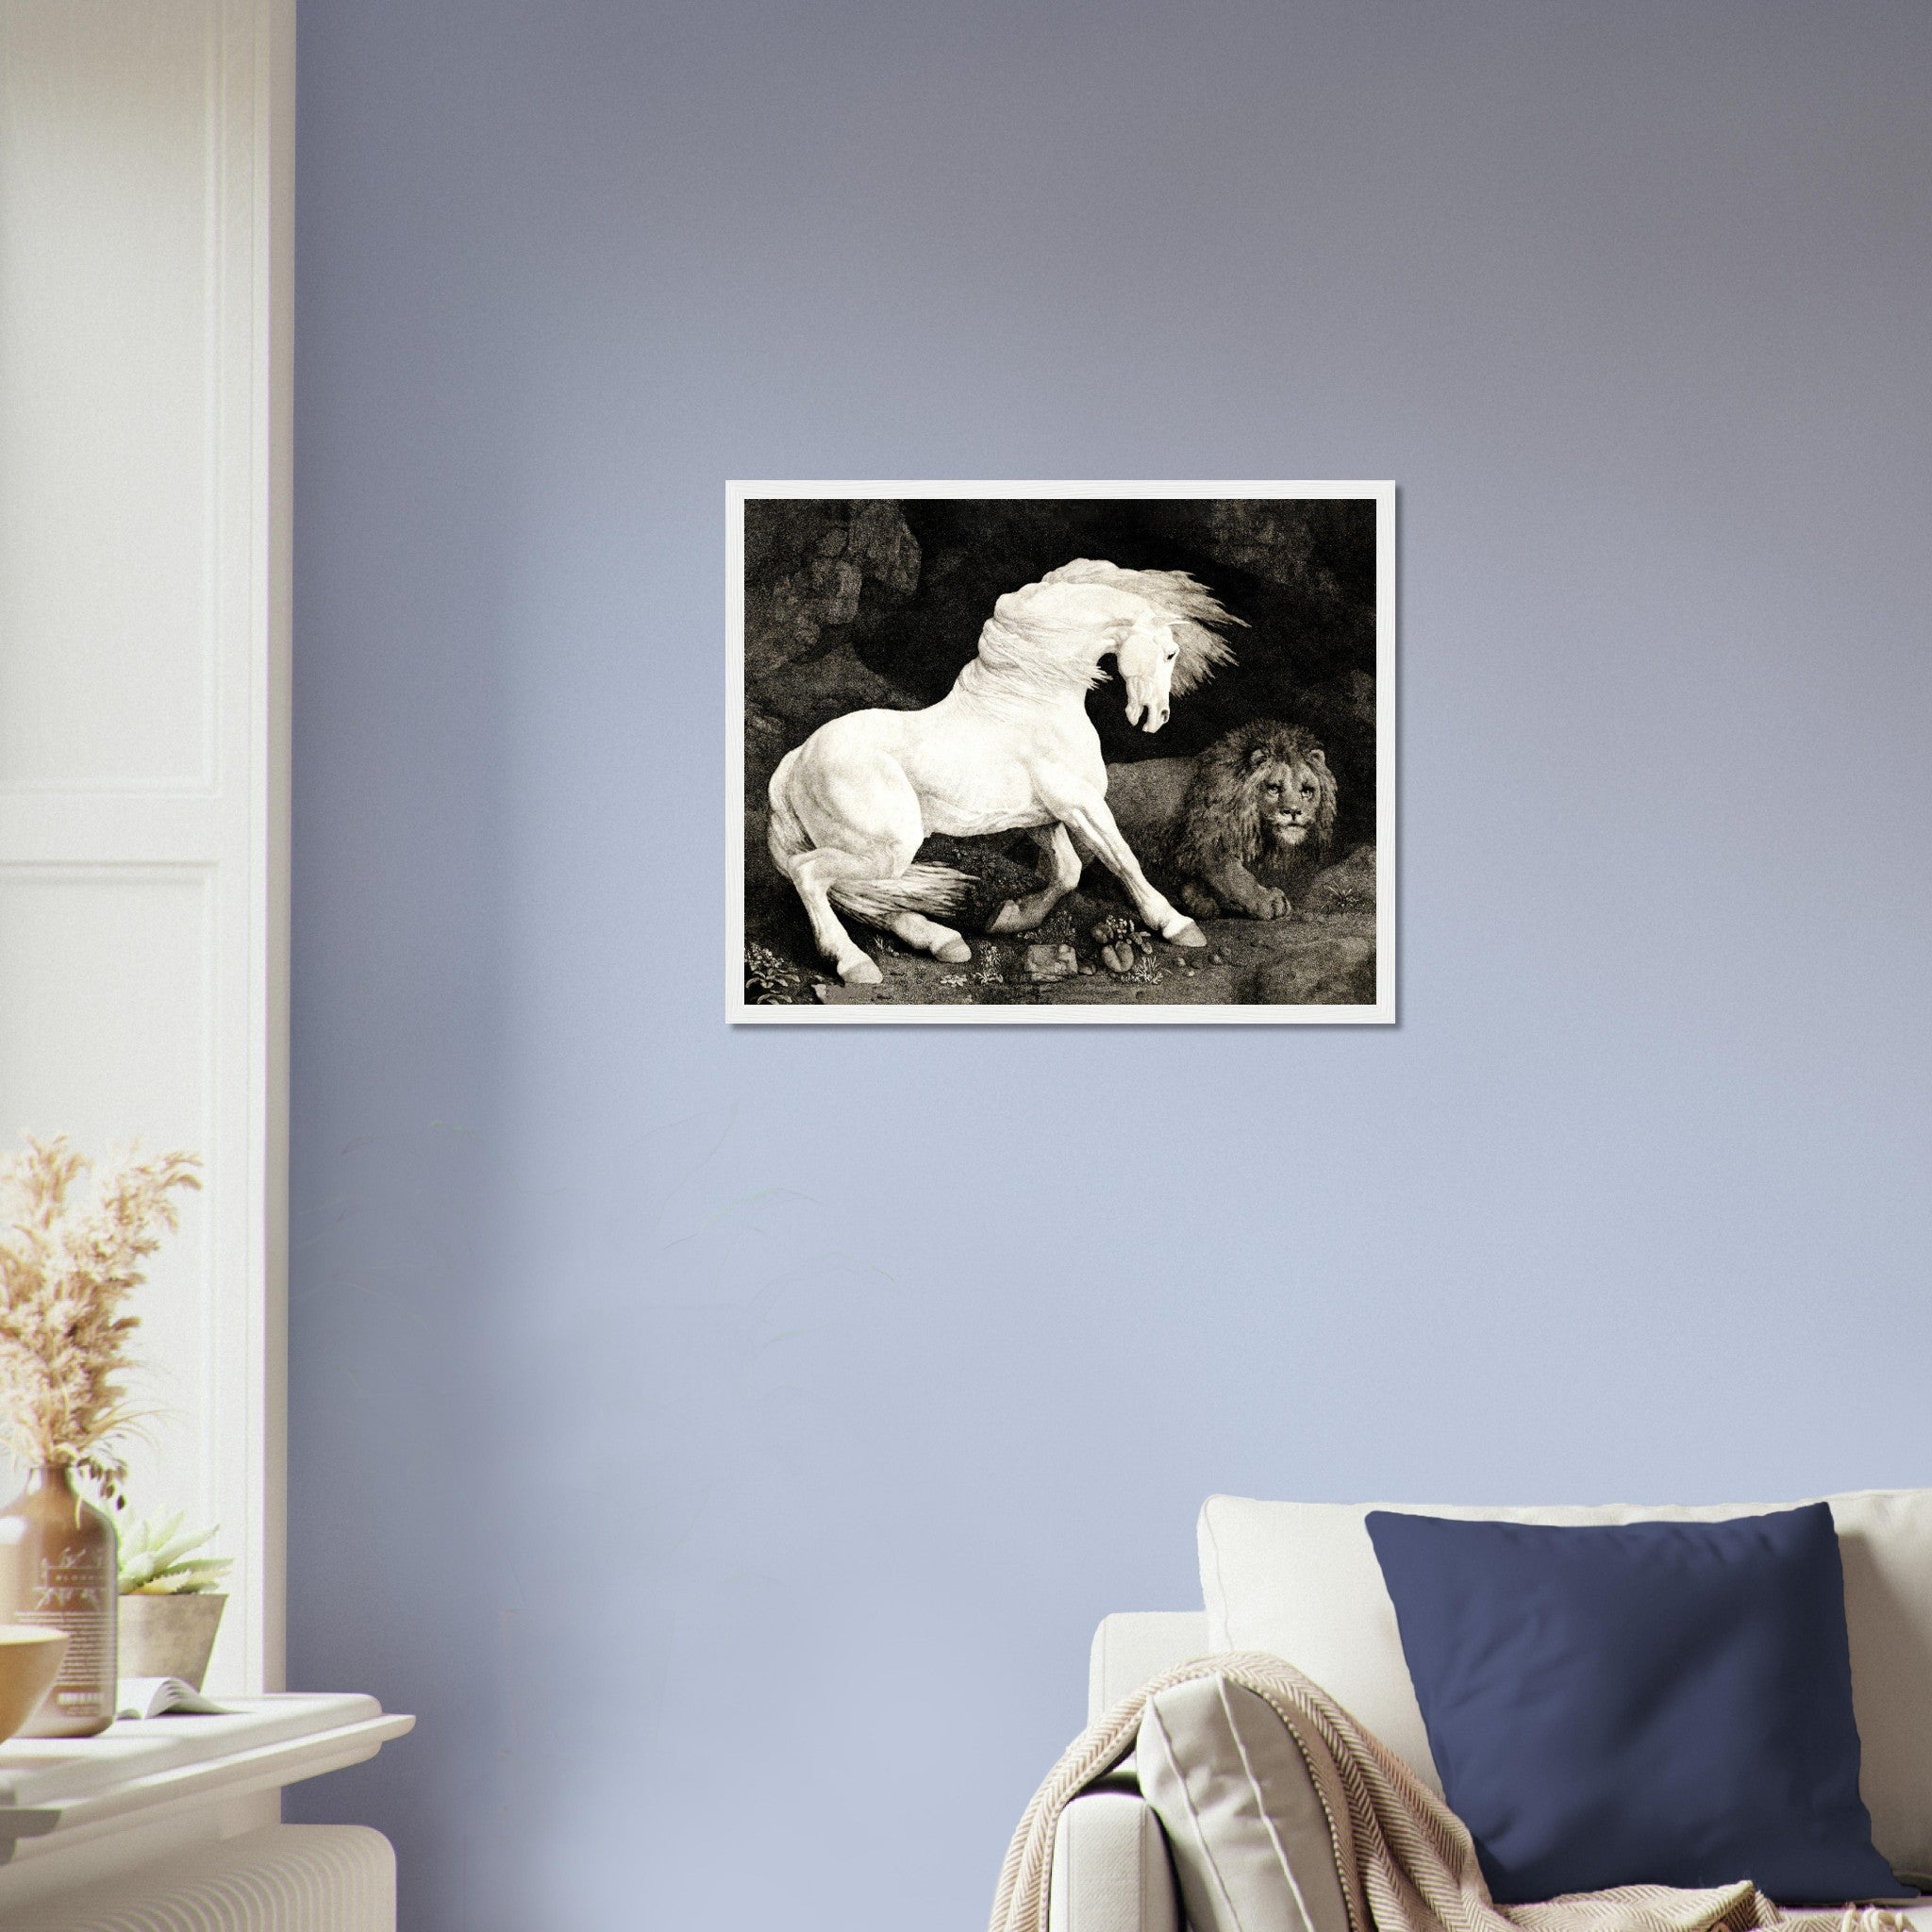 Vintage Frightened Horse Framed Print, A Horse Affrighted By A Lion - George Stubbs - WallArtPrints4U